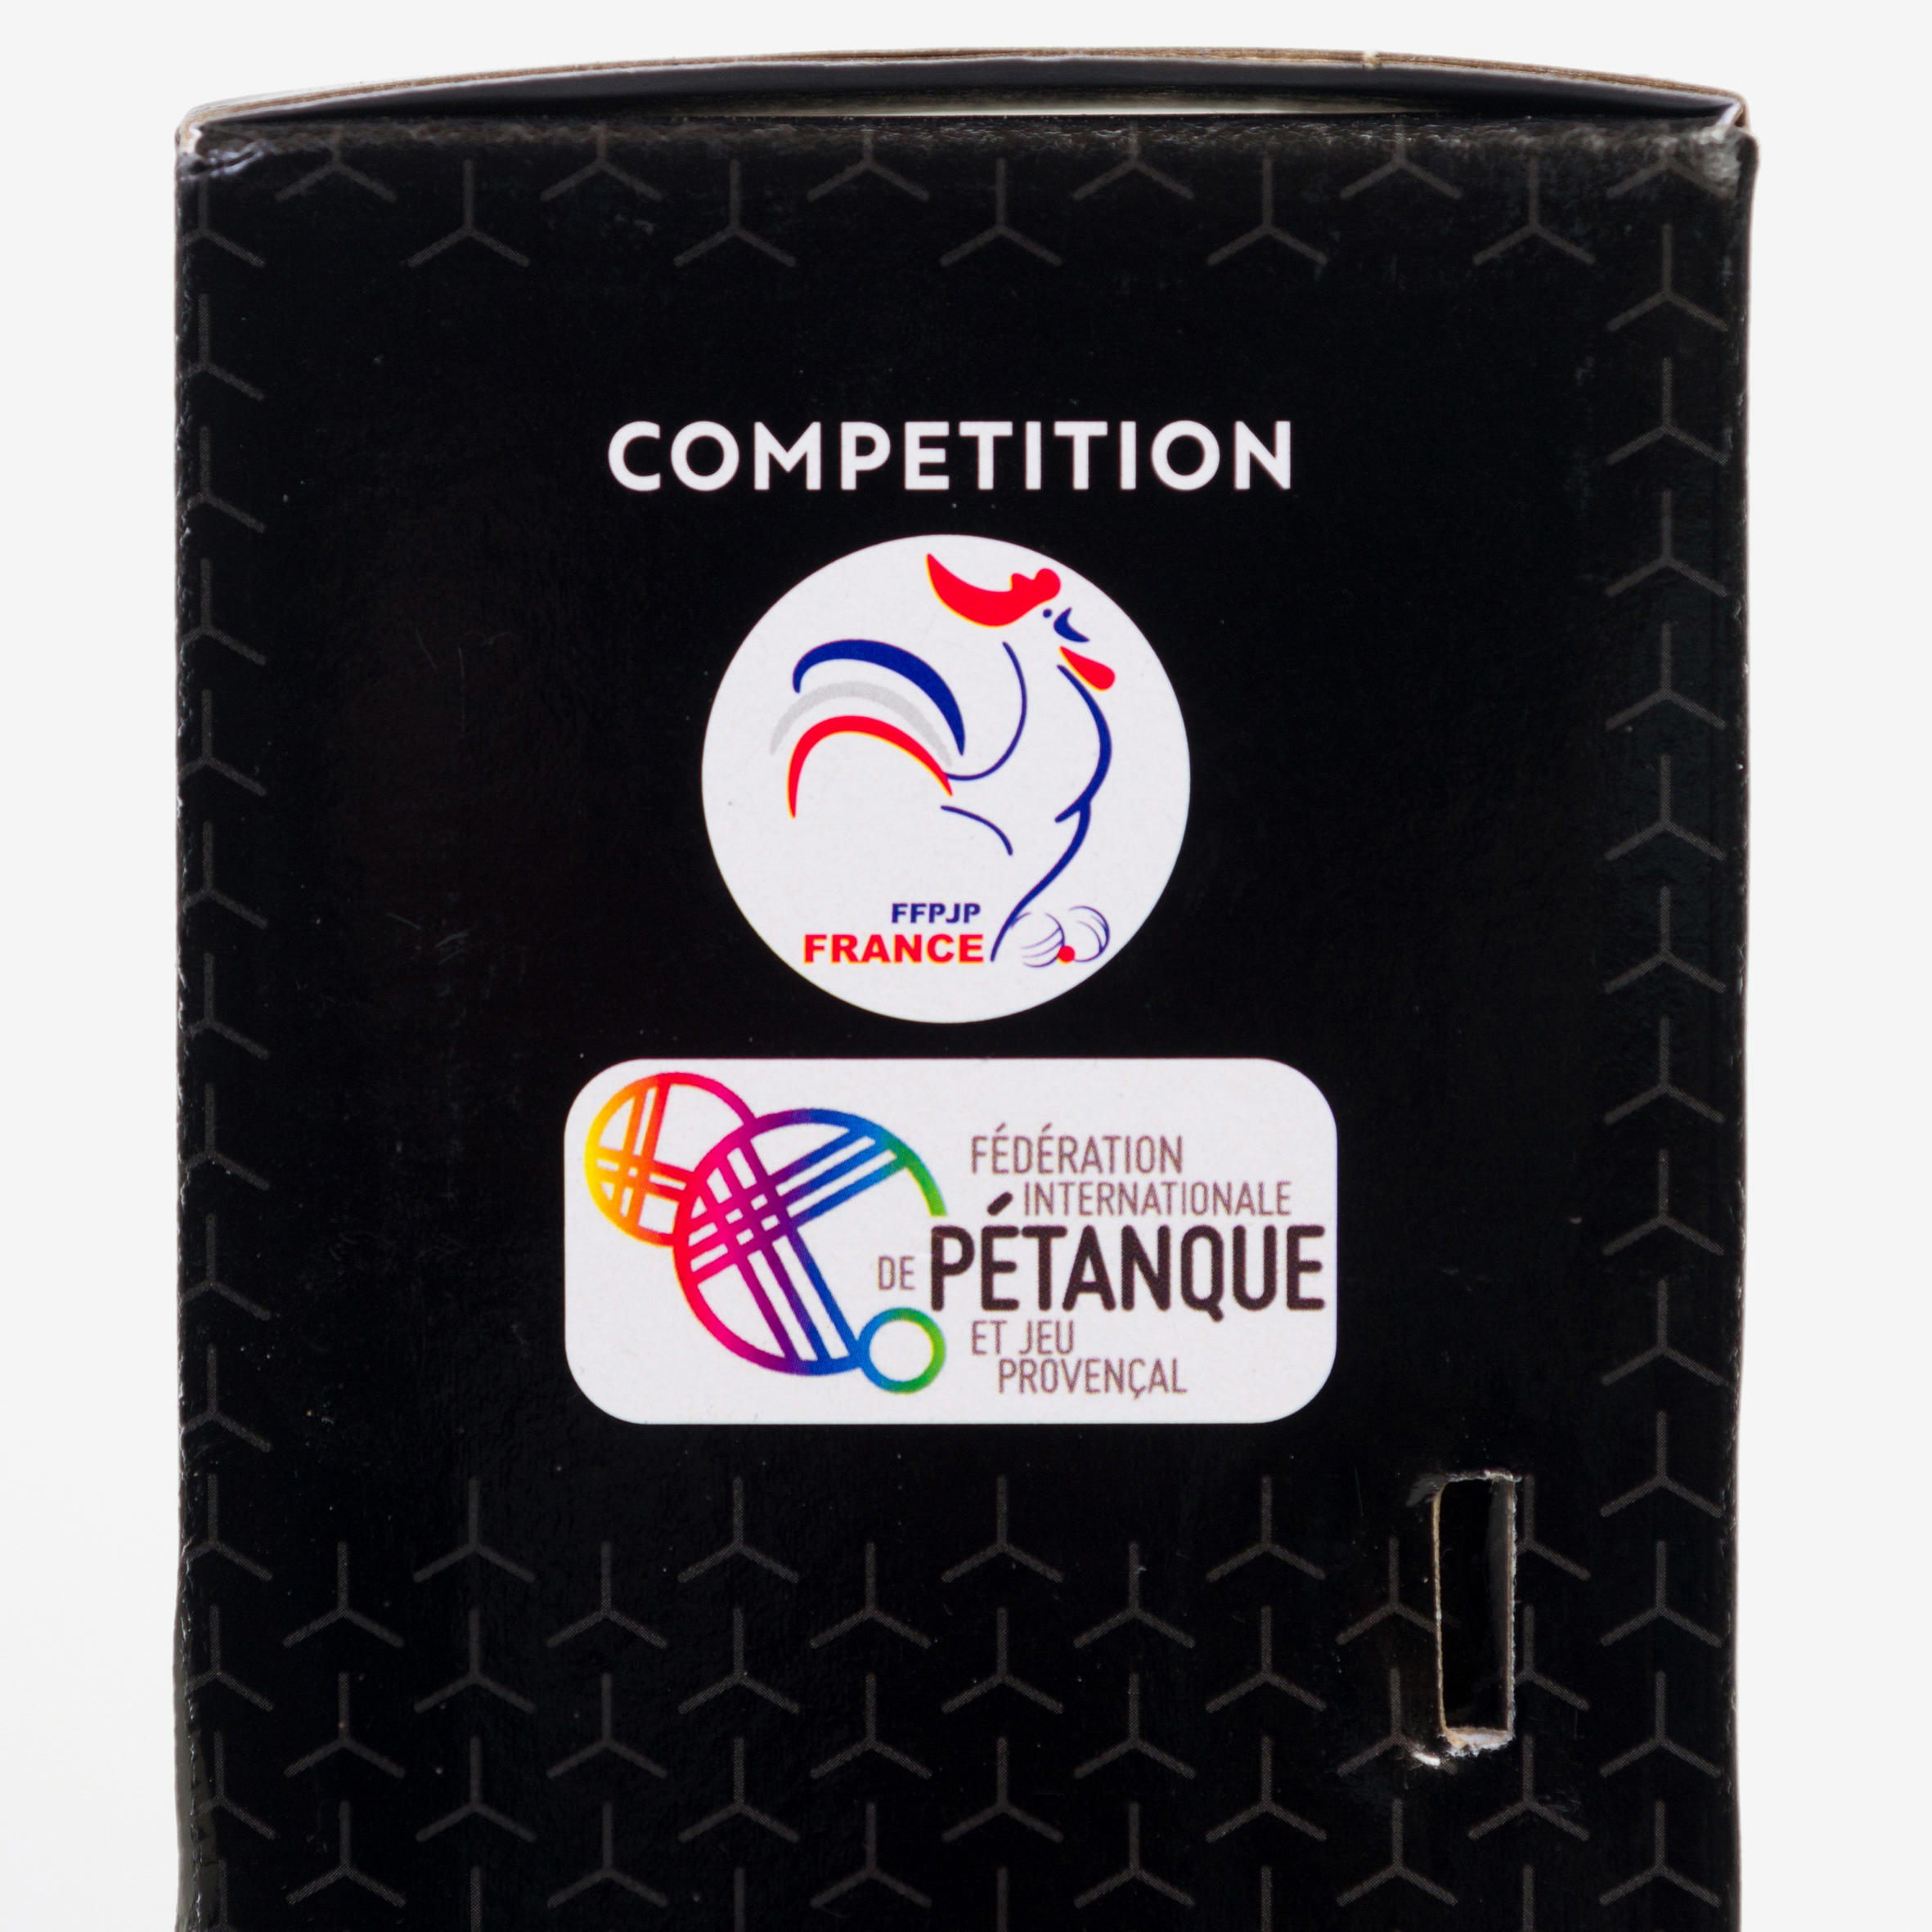 3 Semi-Soft Stainless Steel Competition Petanque Boules 7/13